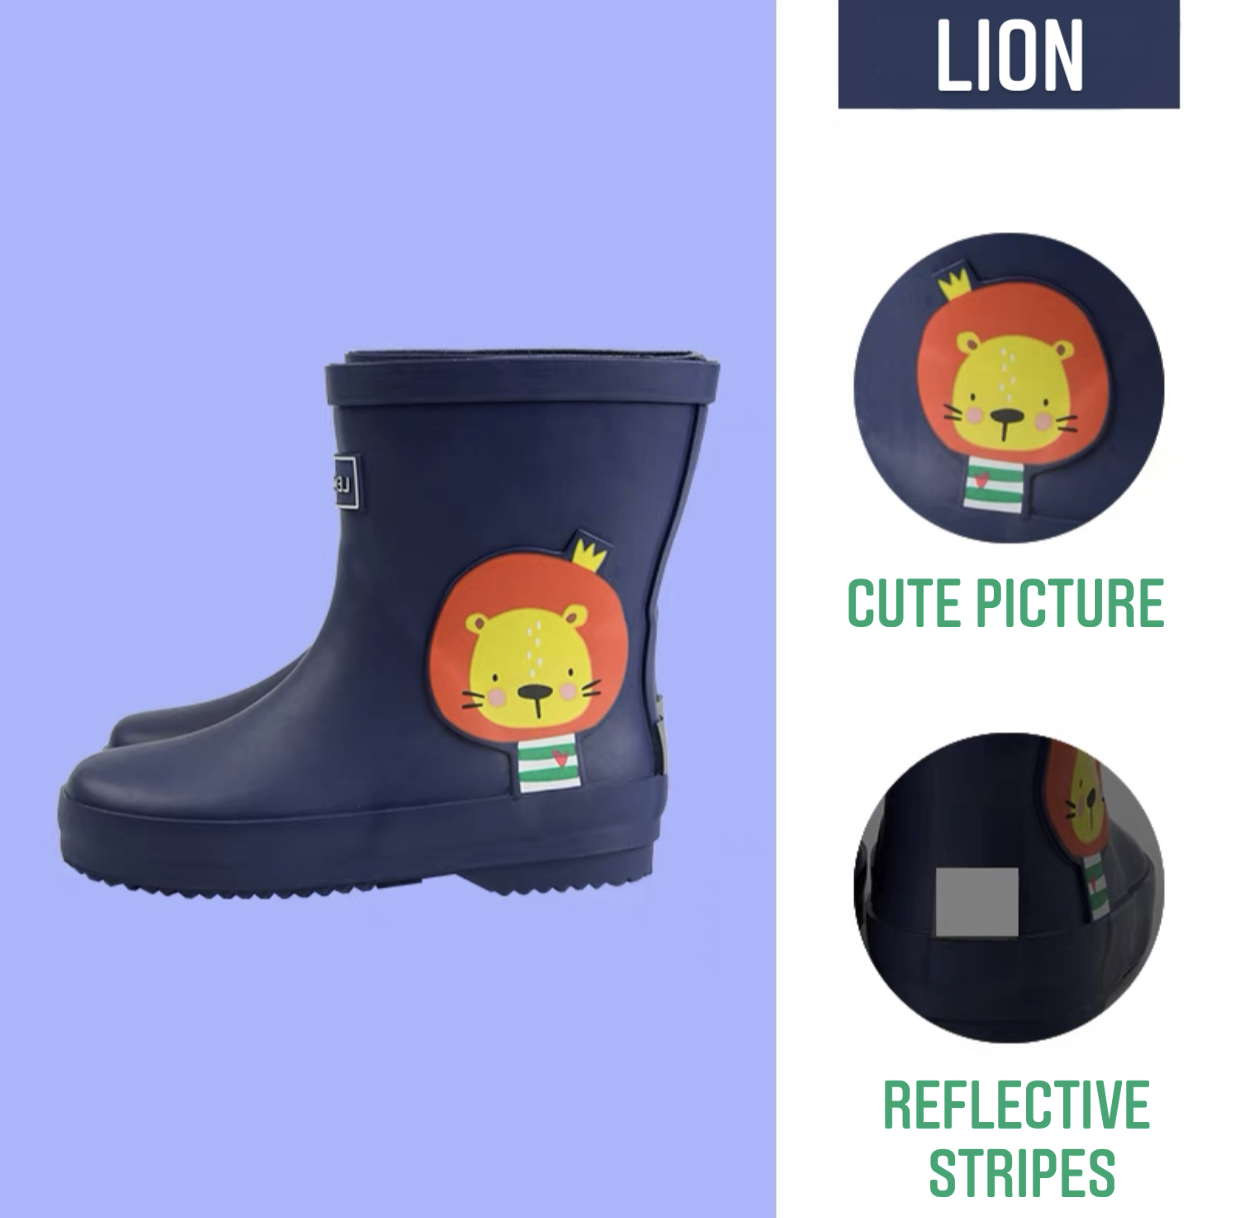 Rubber boots with lion